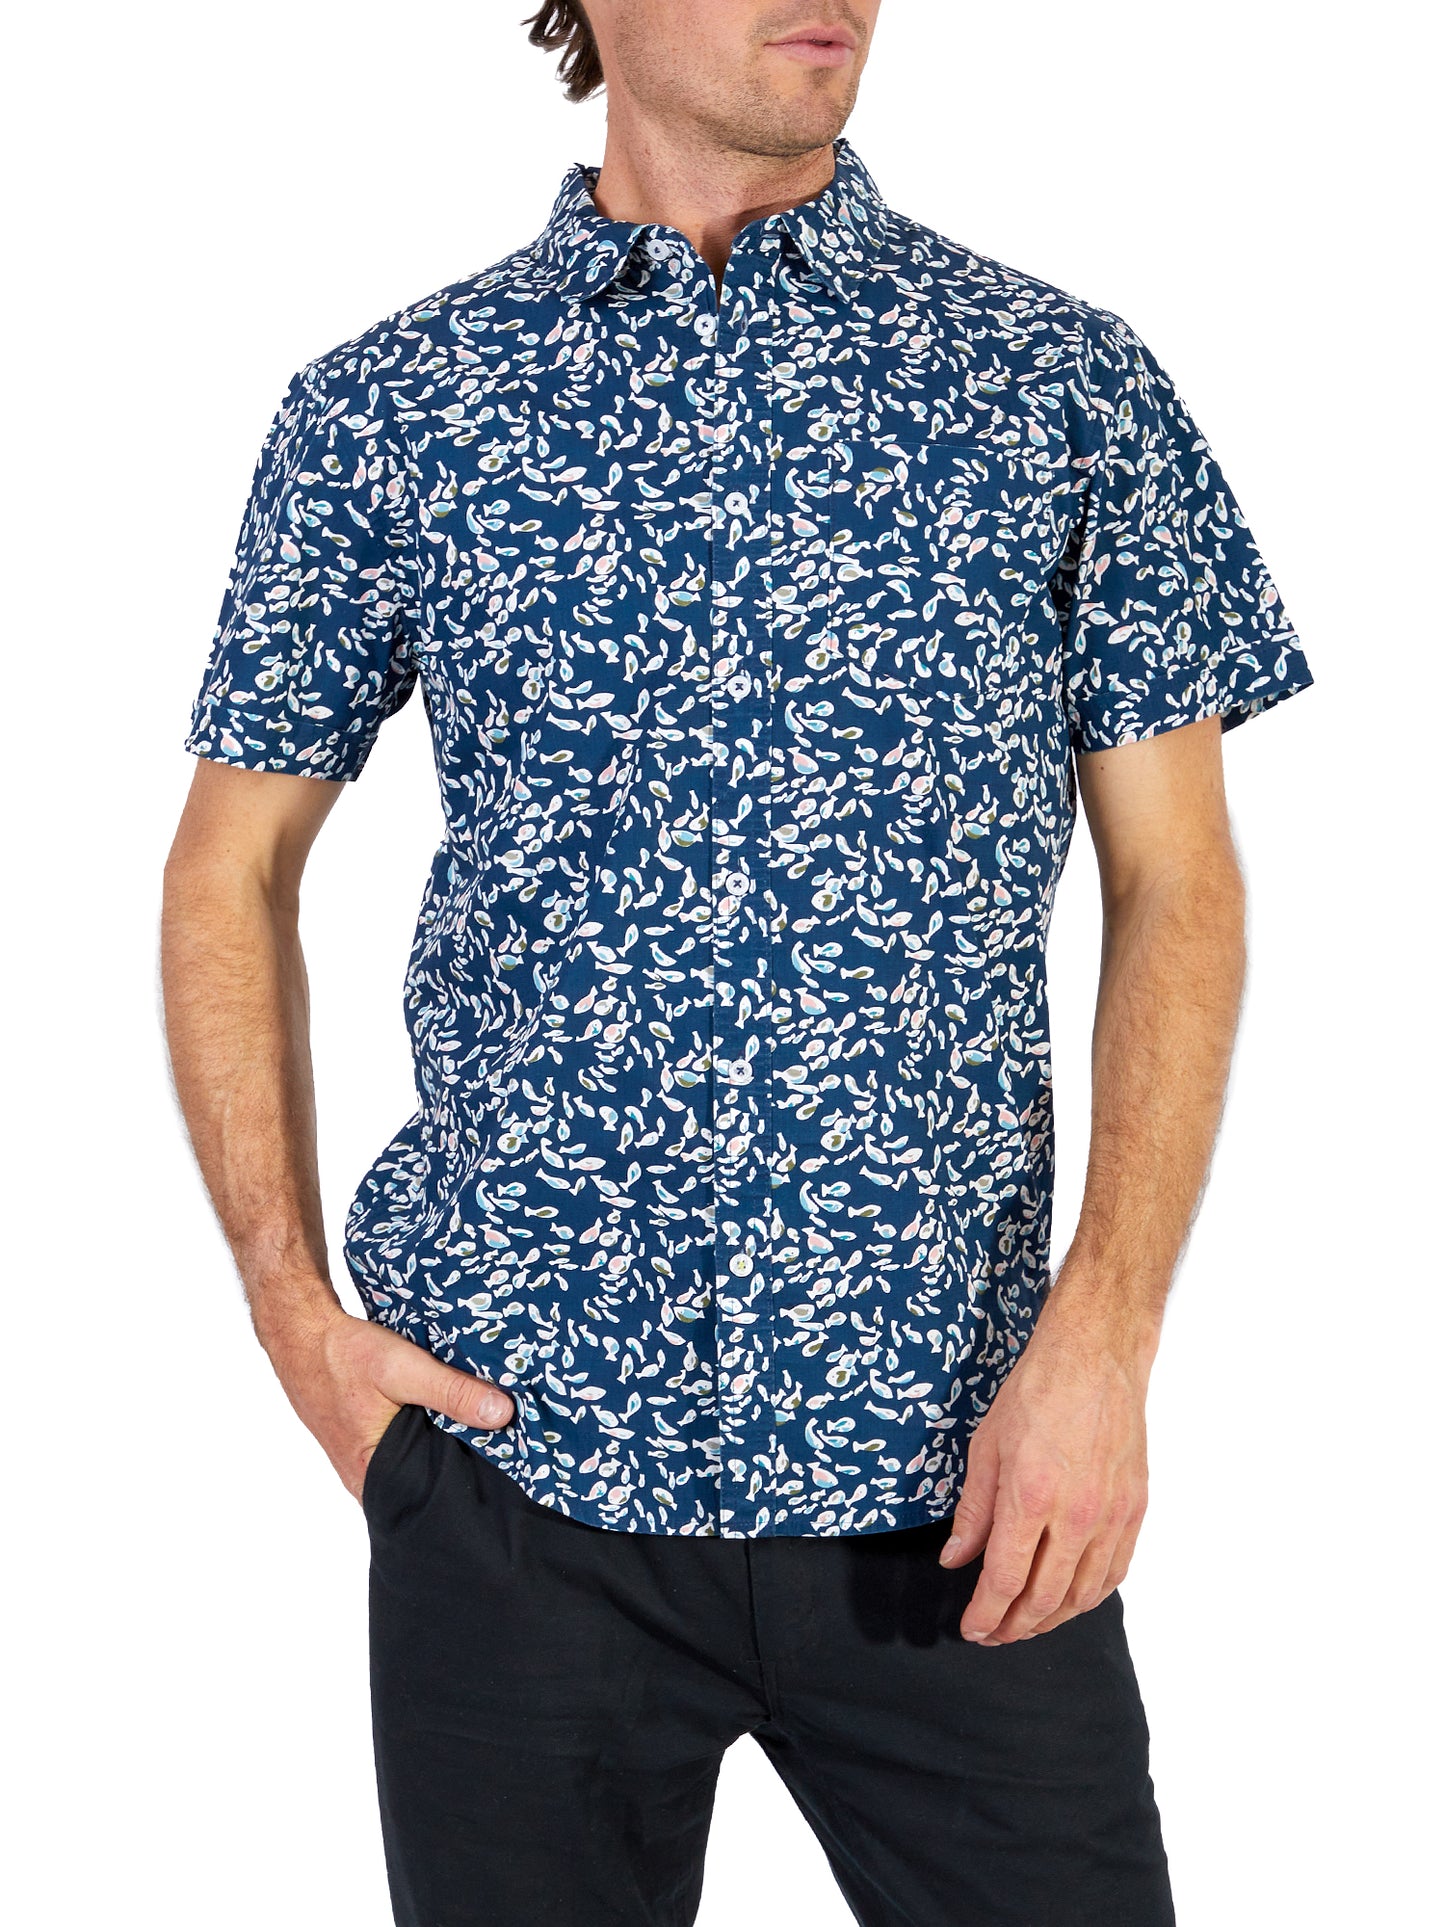 Silver Men's Navy Fish Button up Top